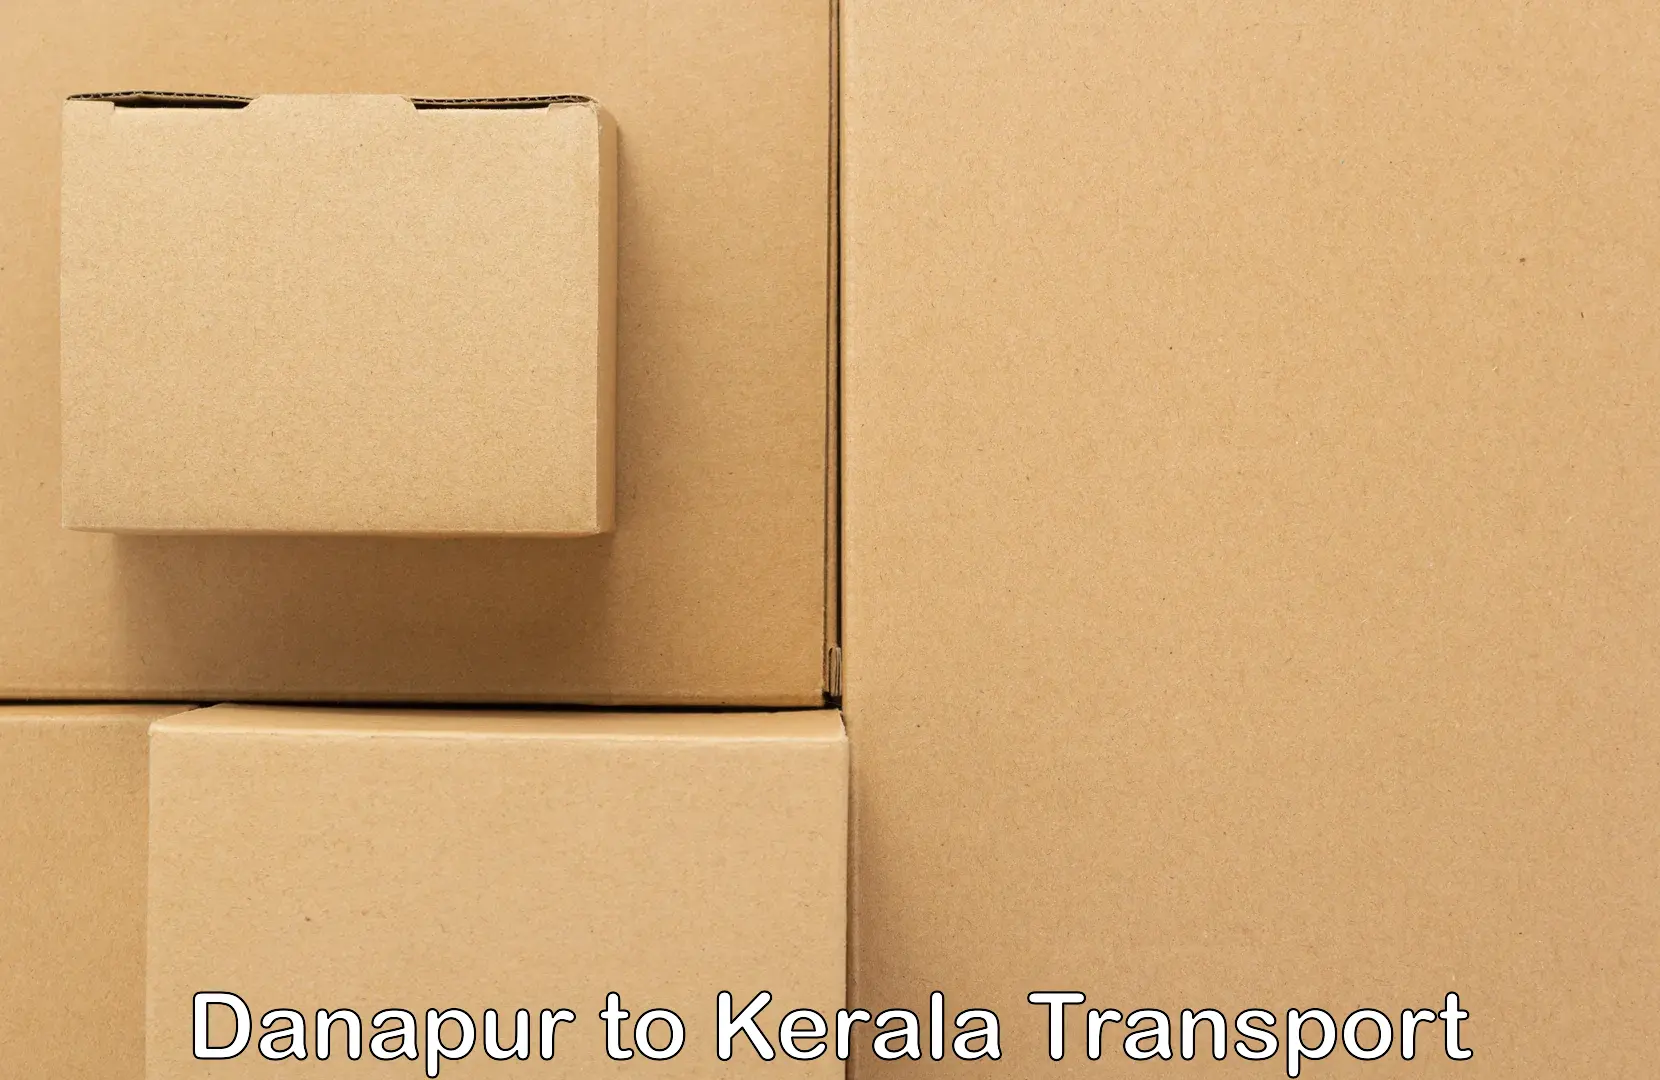 Commercial transport service Danapur to Mahe